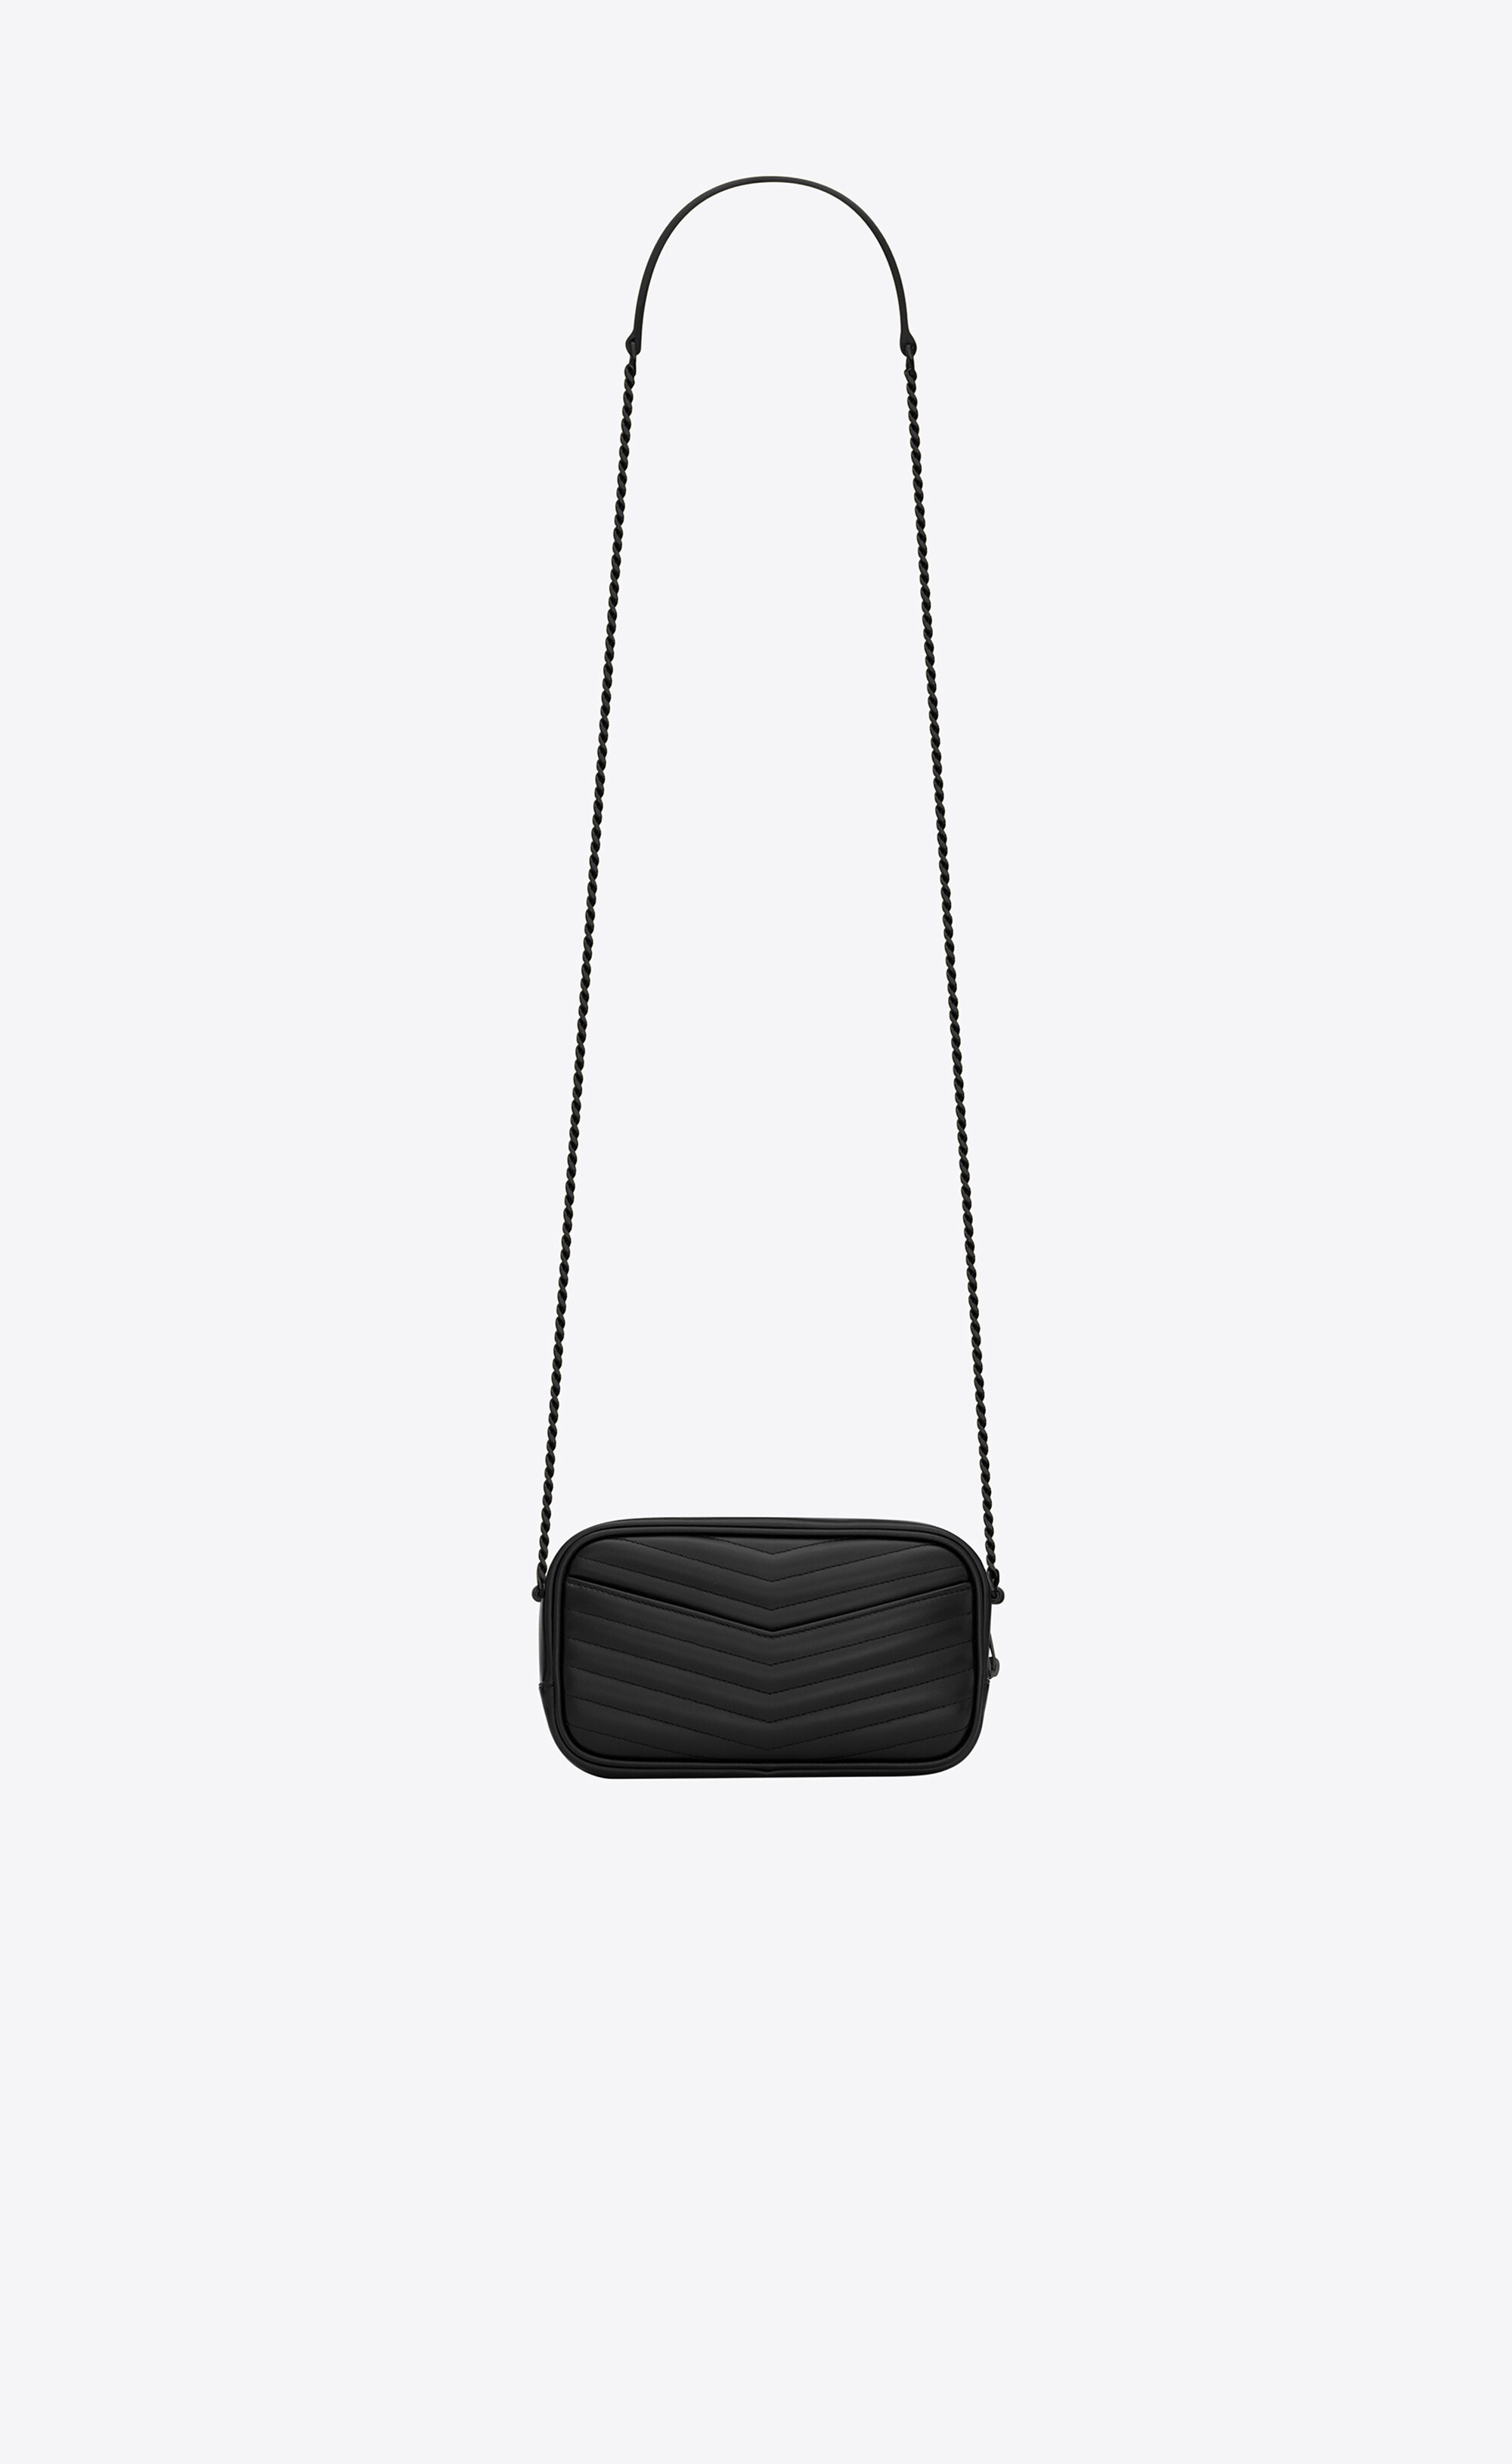 SAINT LAURENT lou mini bag in quilted shiny leather